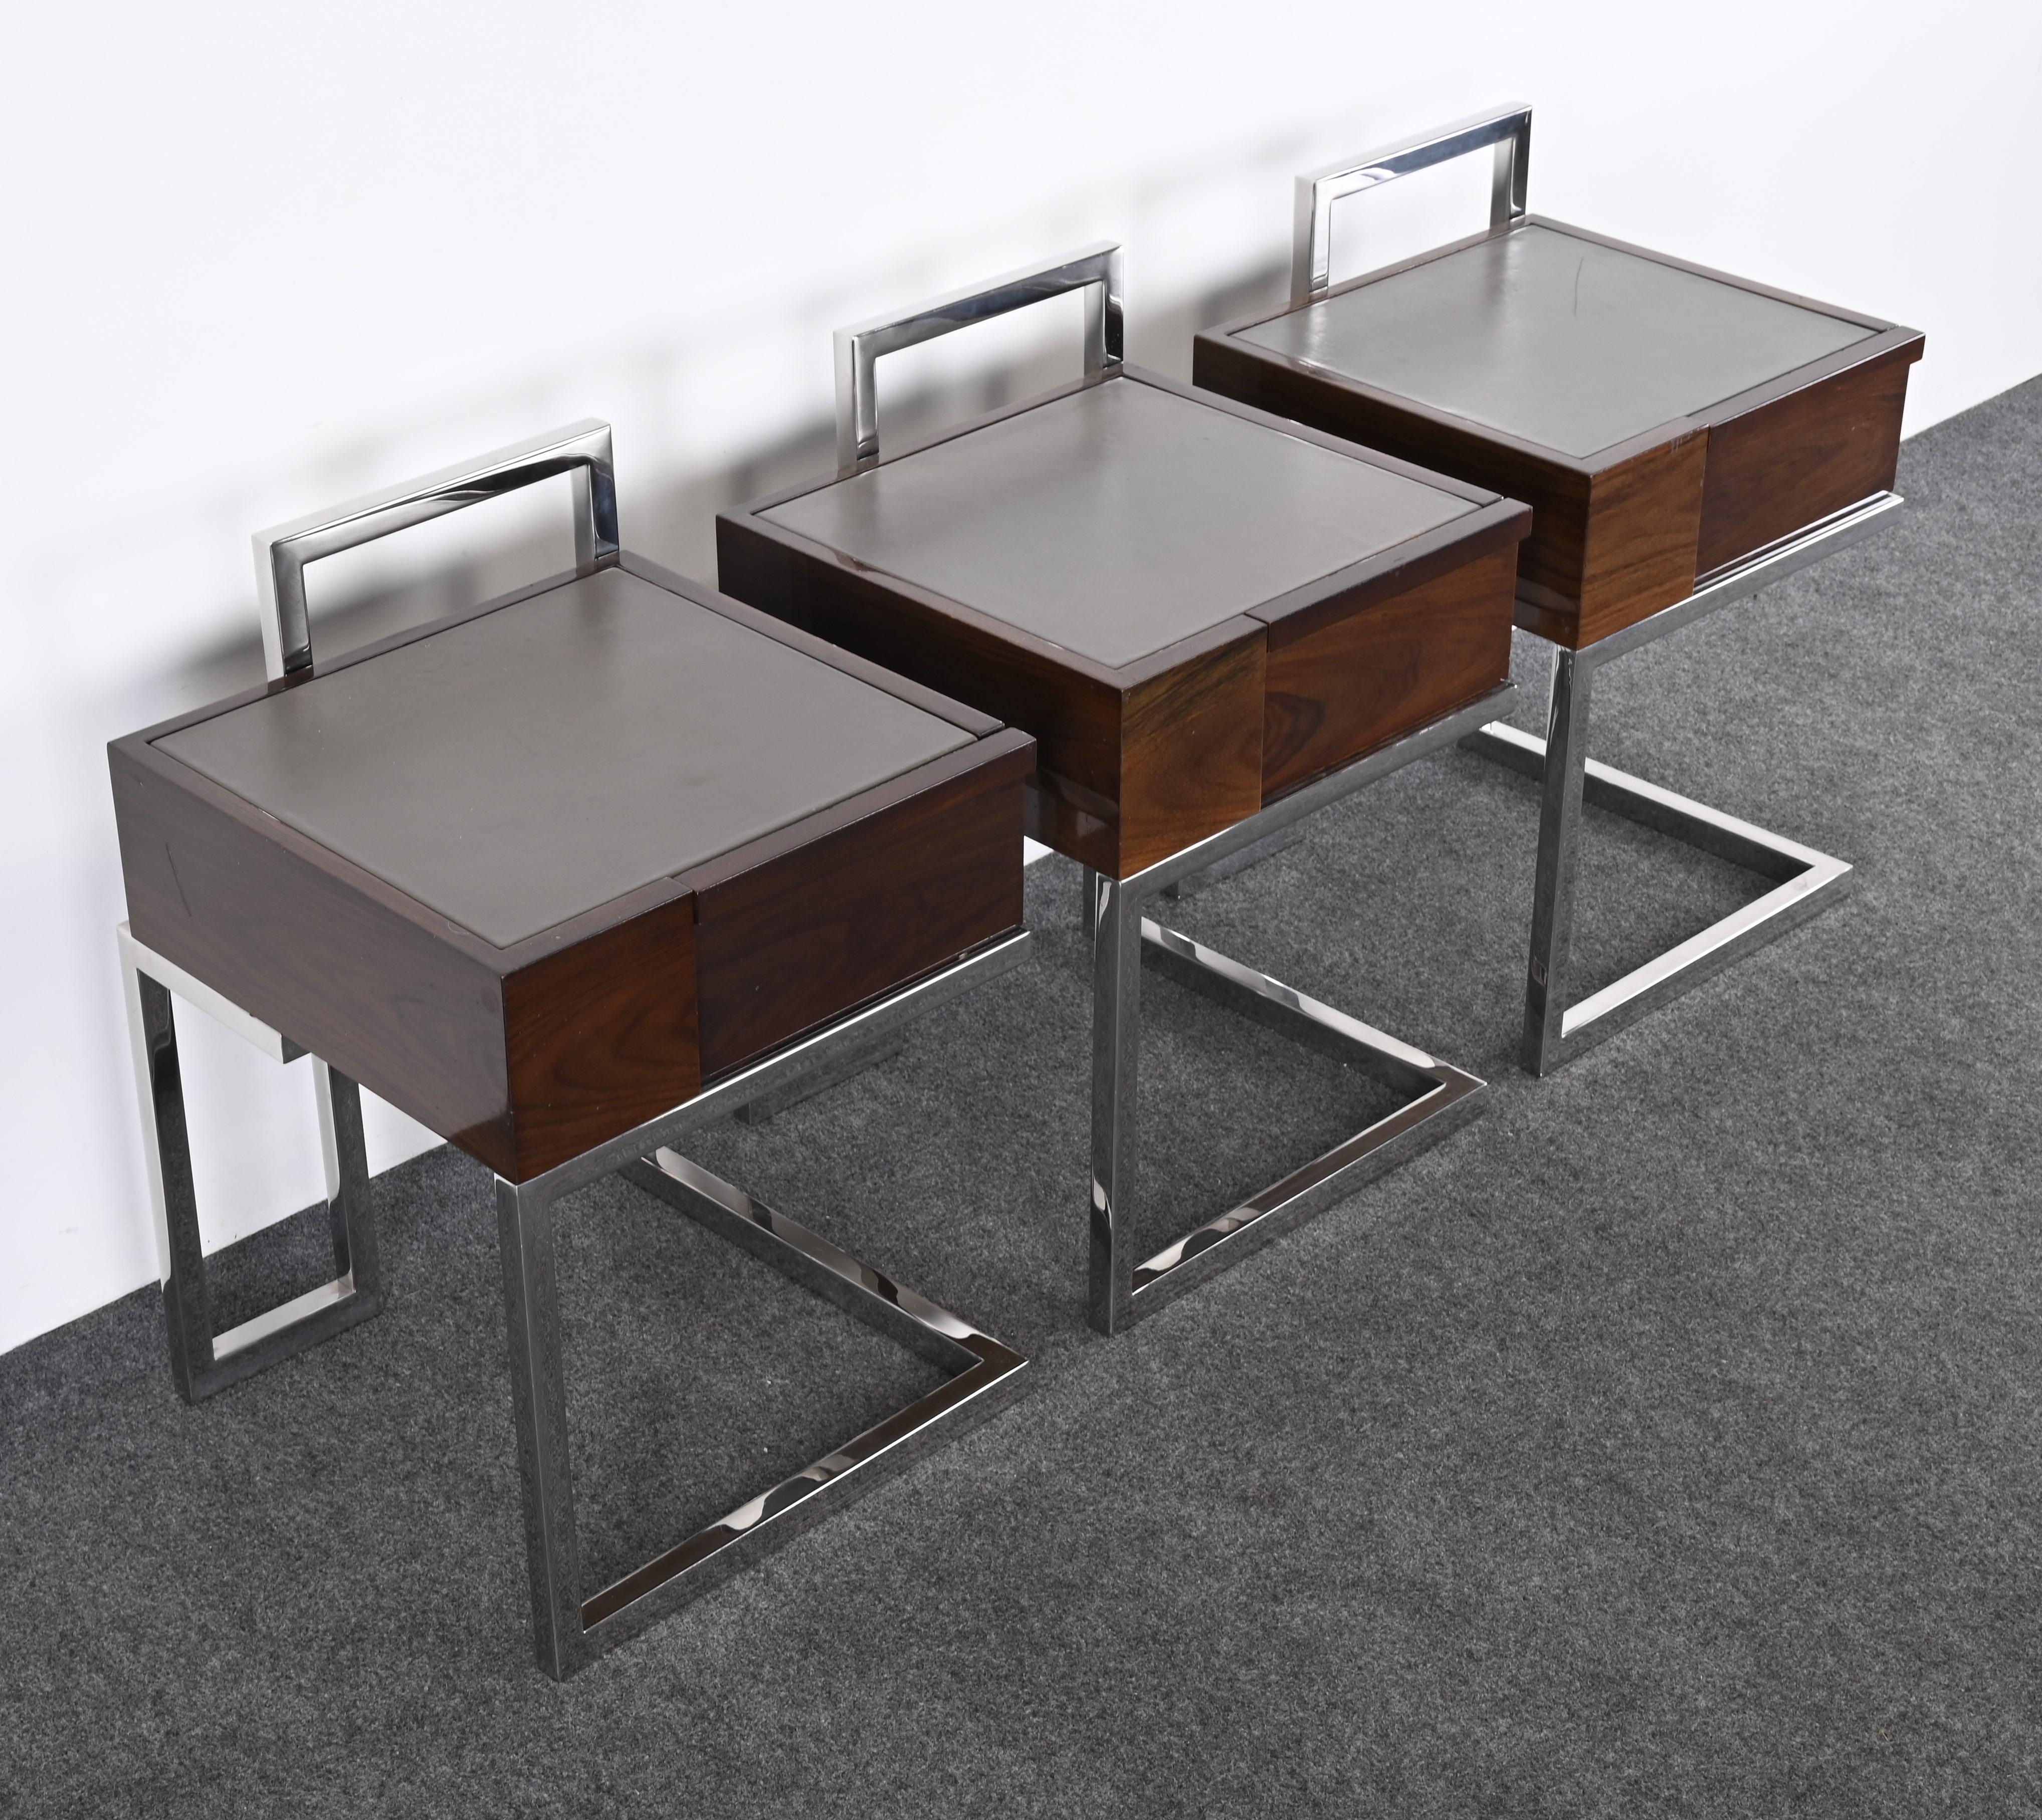 Late 20th Century Lacquered Walnut and Stainless Steel End Tables by Vladimir Kagan for Gucci For Sale